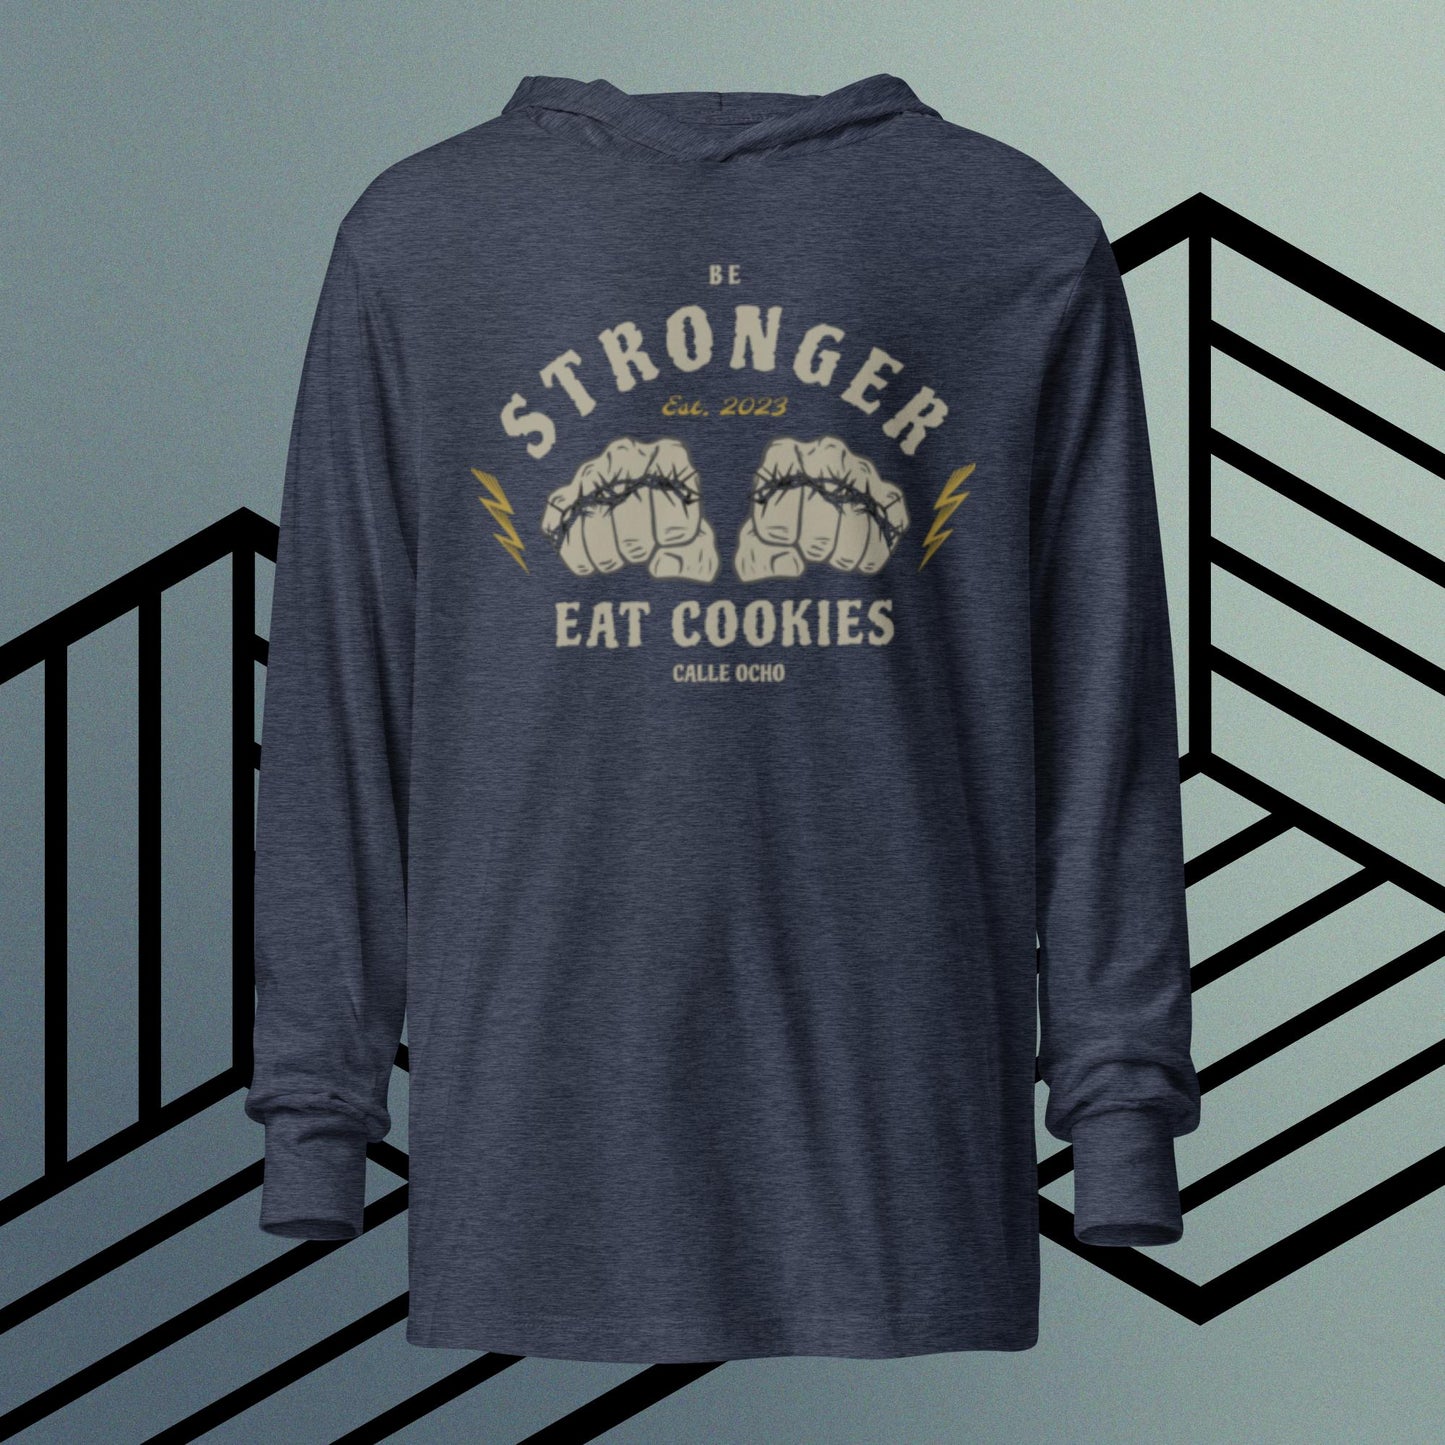 Be stronger, eat cookies hooded T